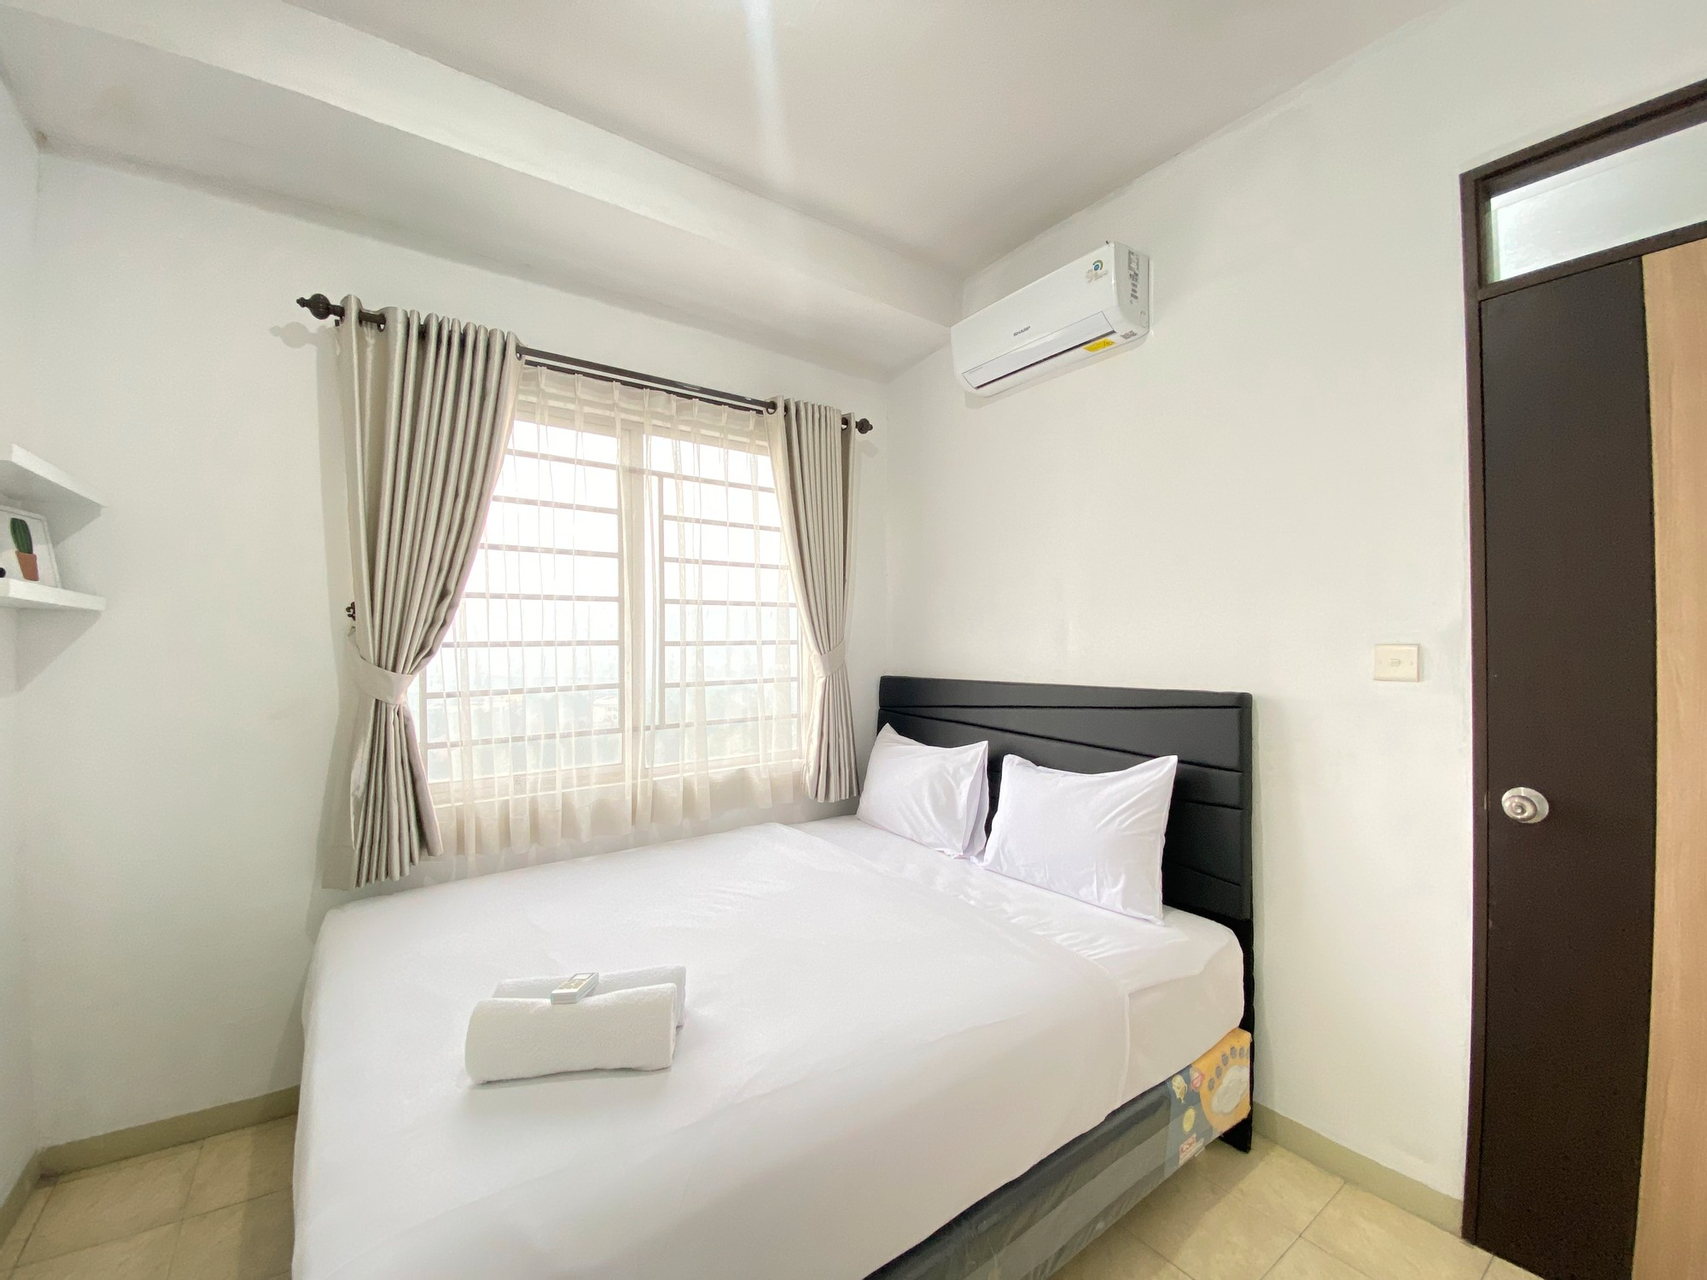 Bedroom 4, Homey 2BR Furnished  Apartment at The Edge Bandung By Travelio, Cimahi